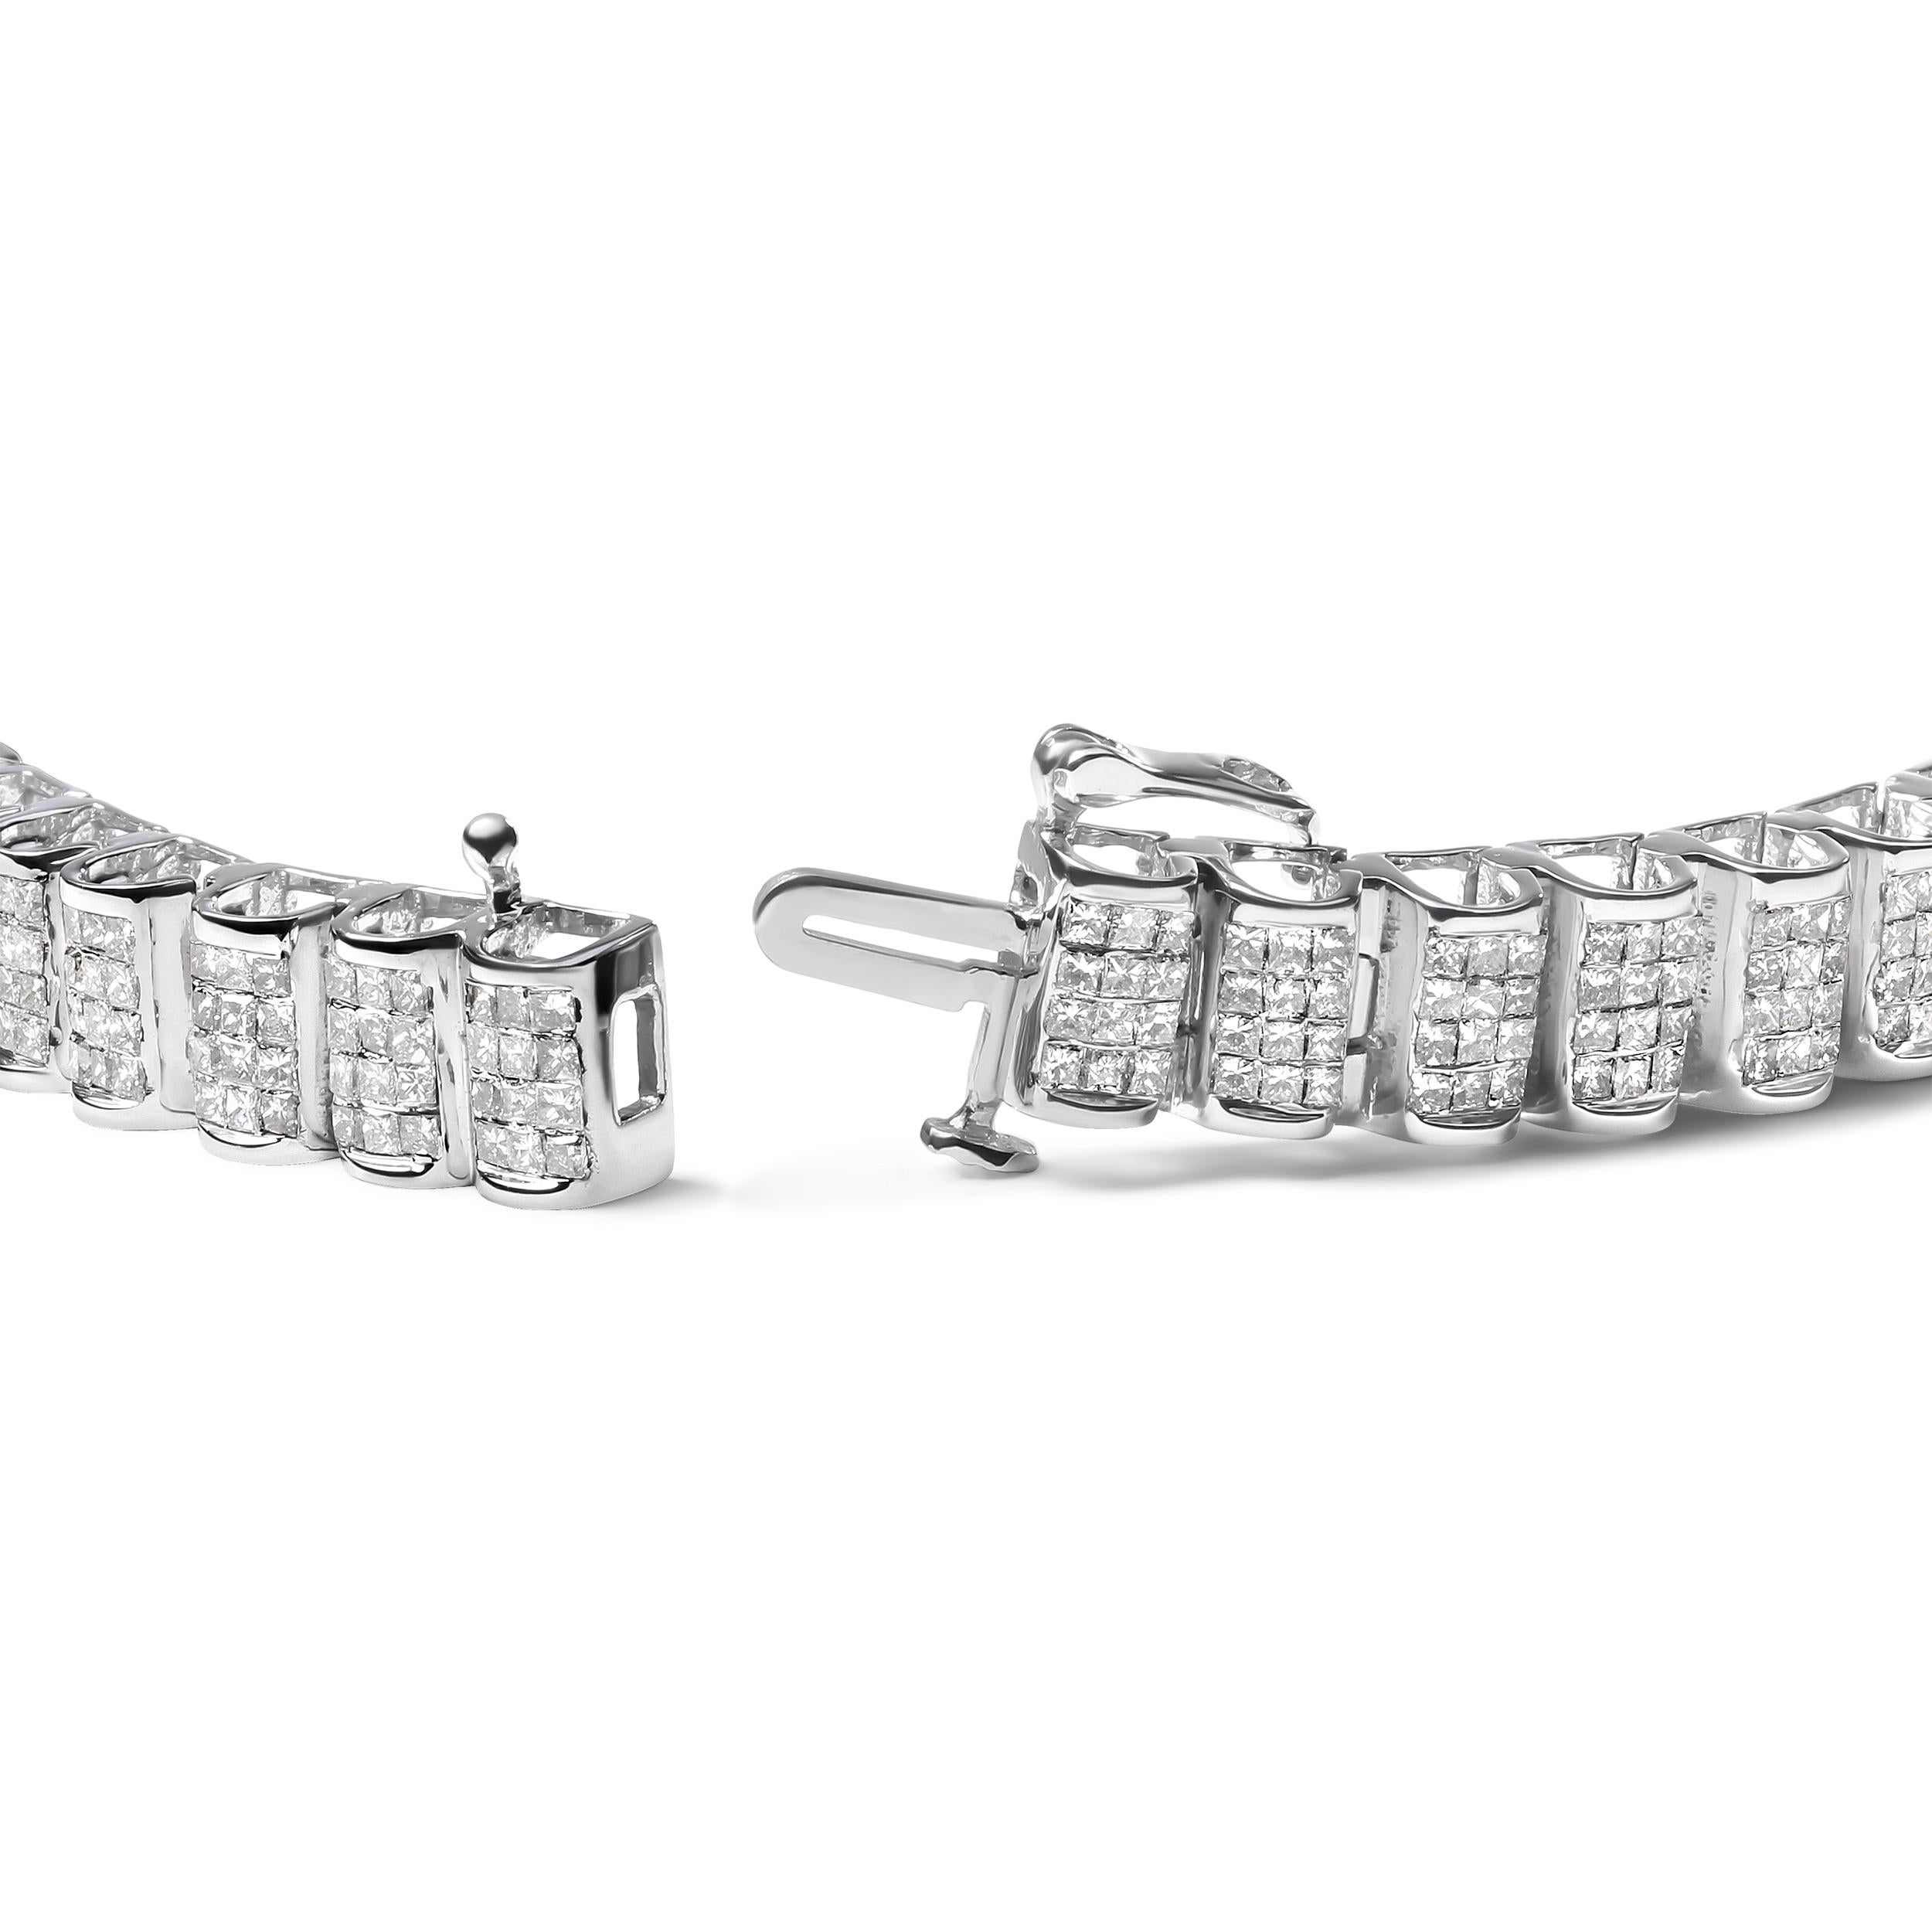 Celebrate a special moment with this exquisite and sparkly white diamond tennis bracelet. This elegant bracelet features hinged rectangular links featuring grids of square princess cut white diamonds in invisible settings. D or bridge shaped guards